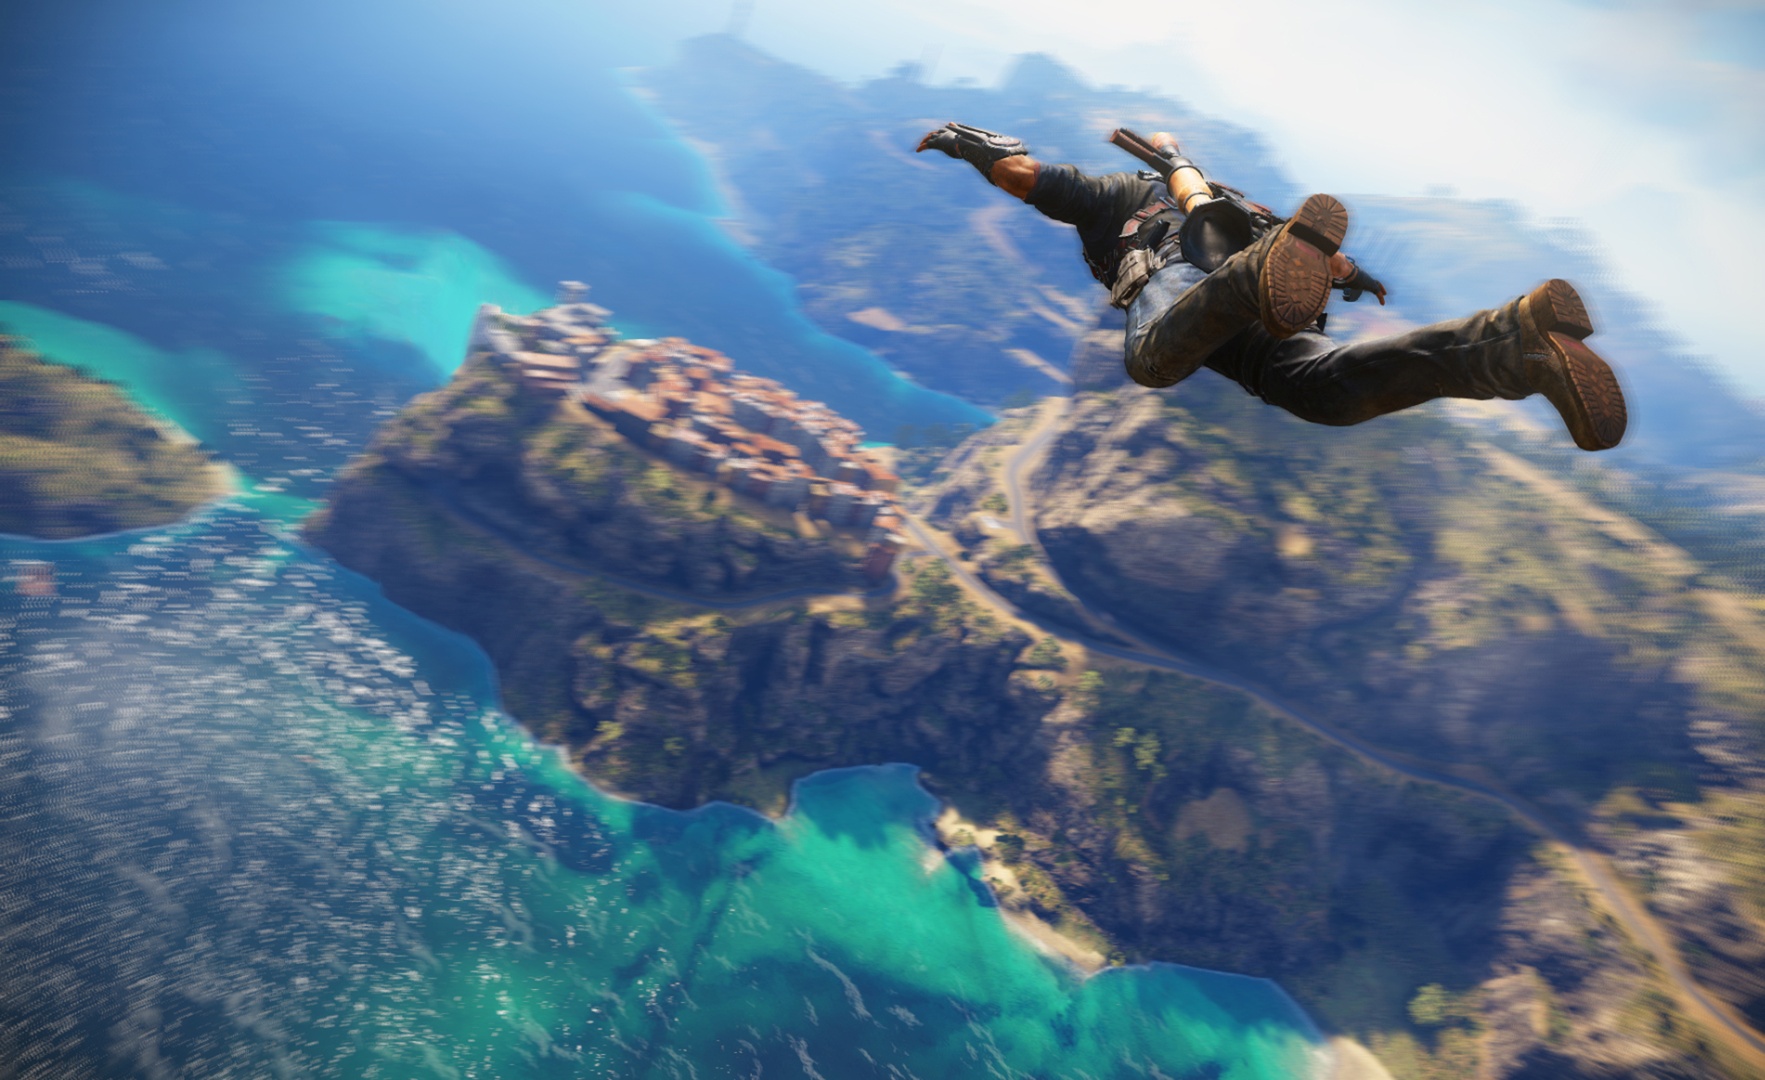 A Serene View From Just Cause 3